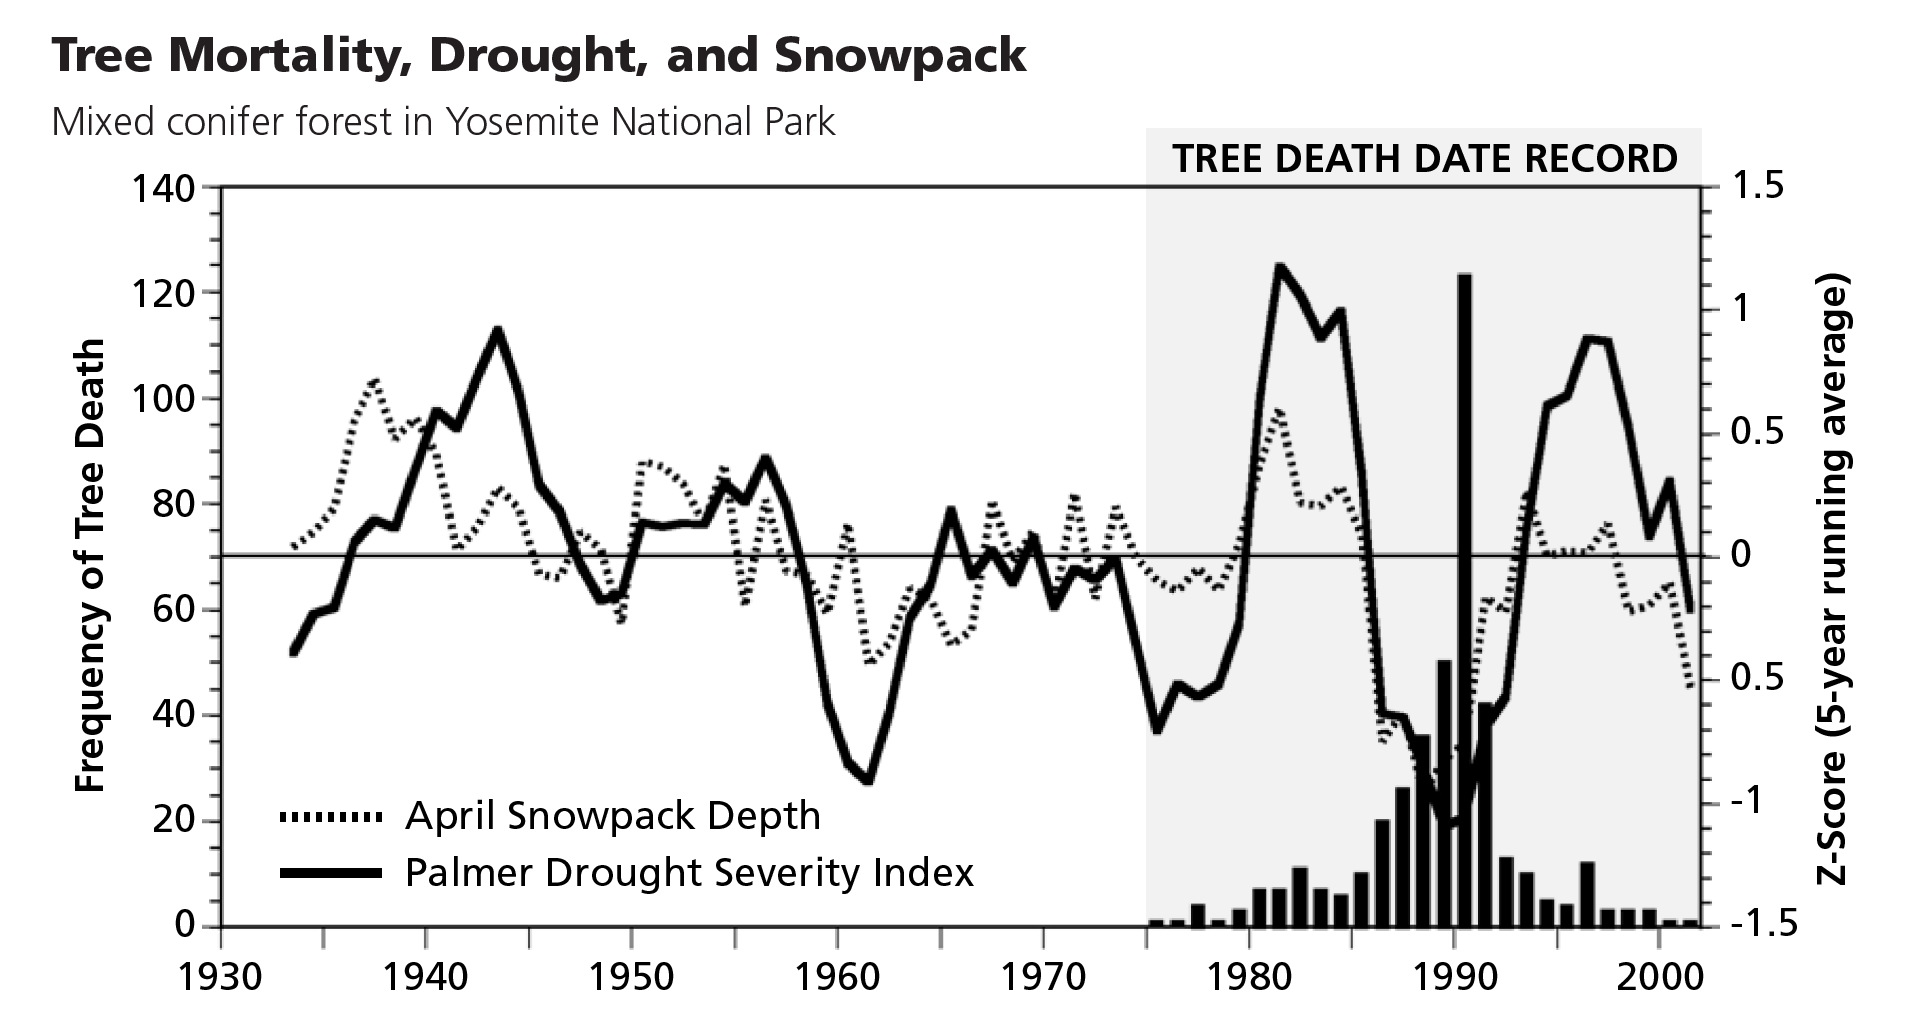 Graph showing high rates of tree mortality during times of high drought and low snowpack.